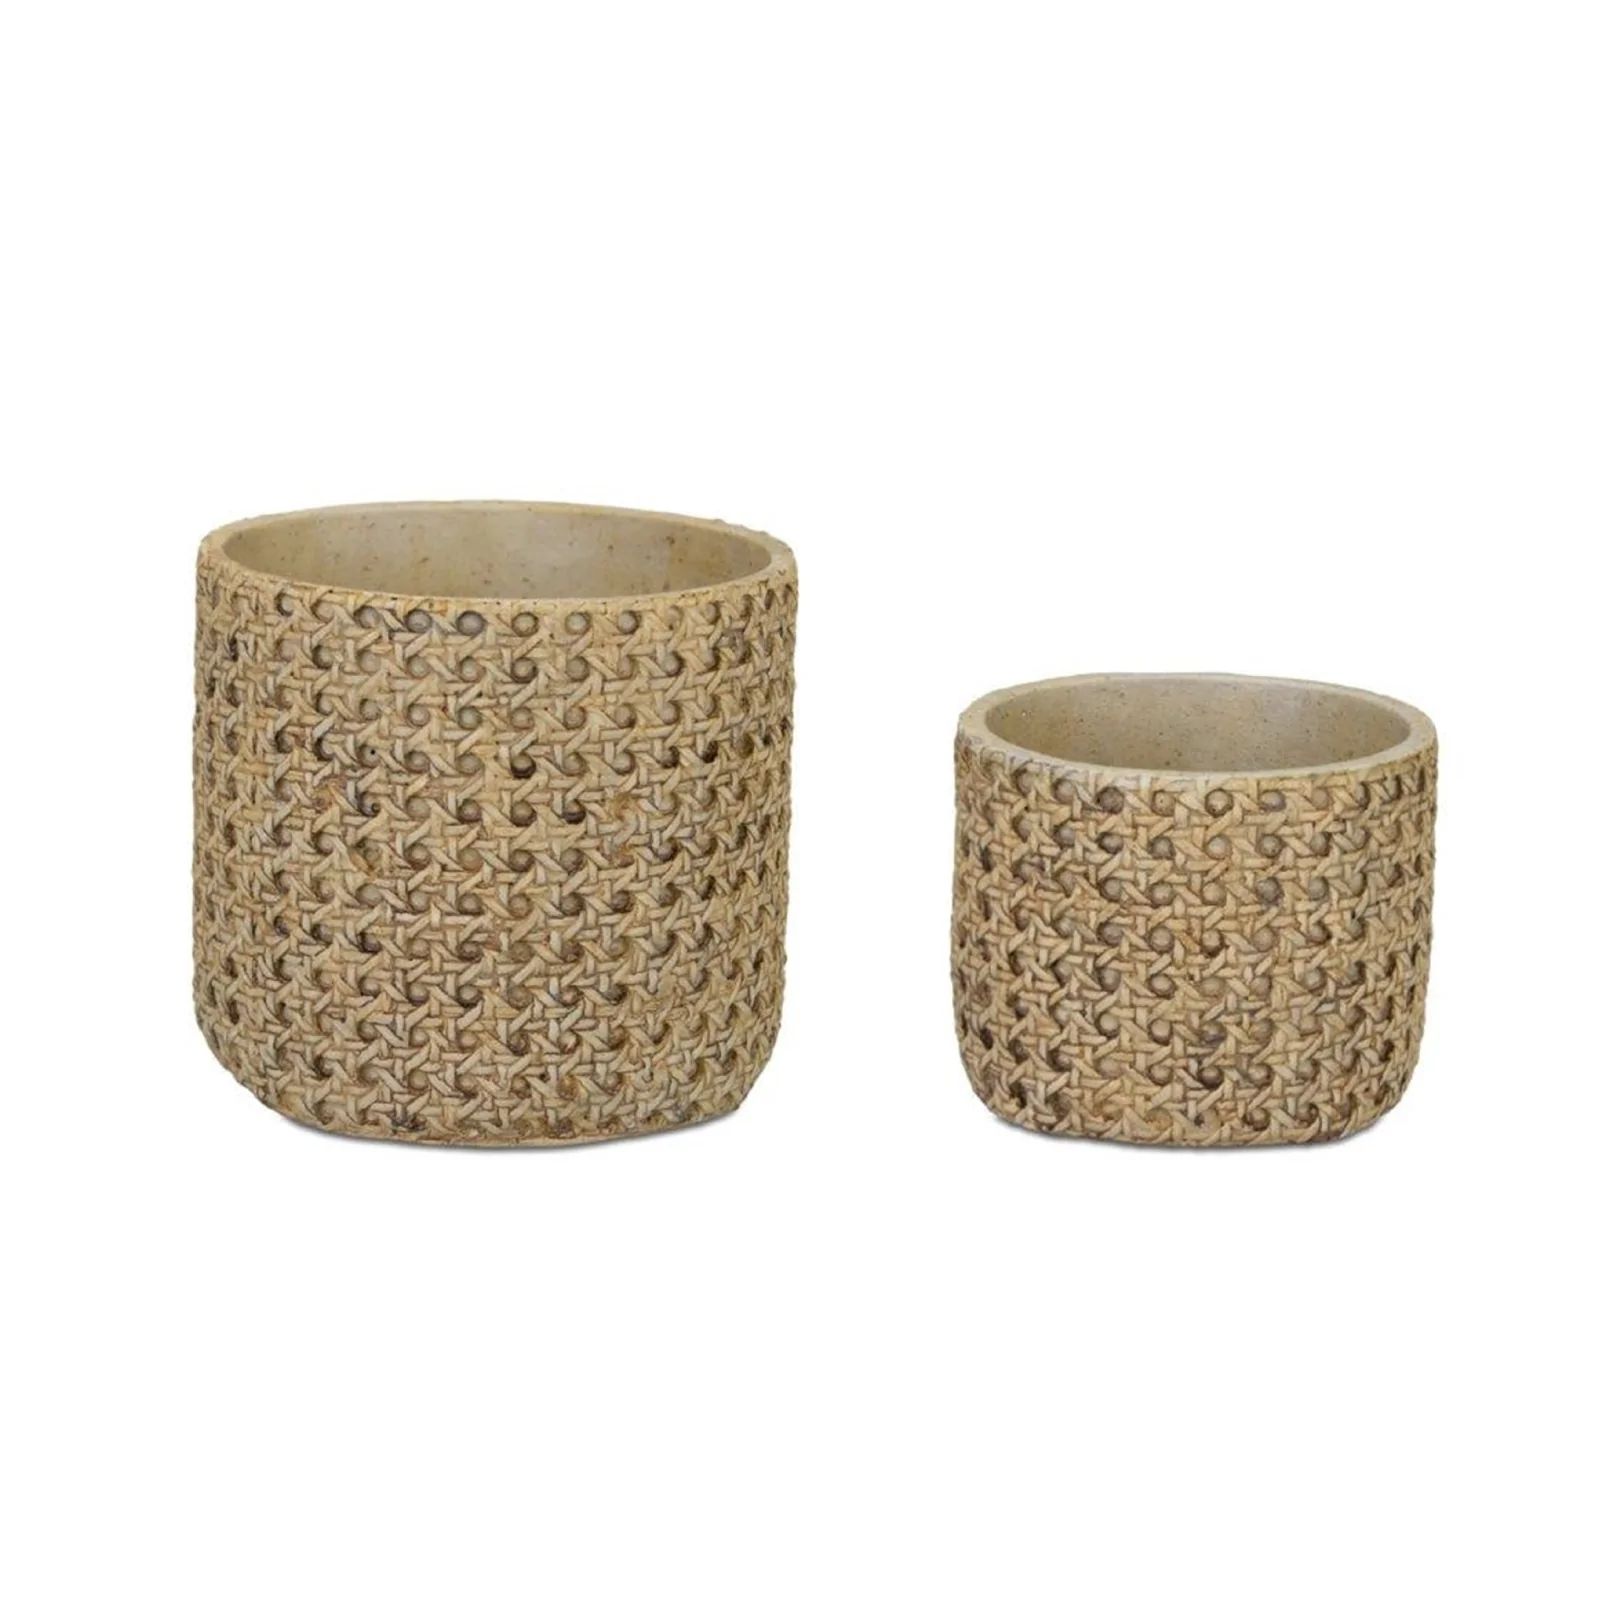 Cane Cement Planter Set | Brooke and Lou